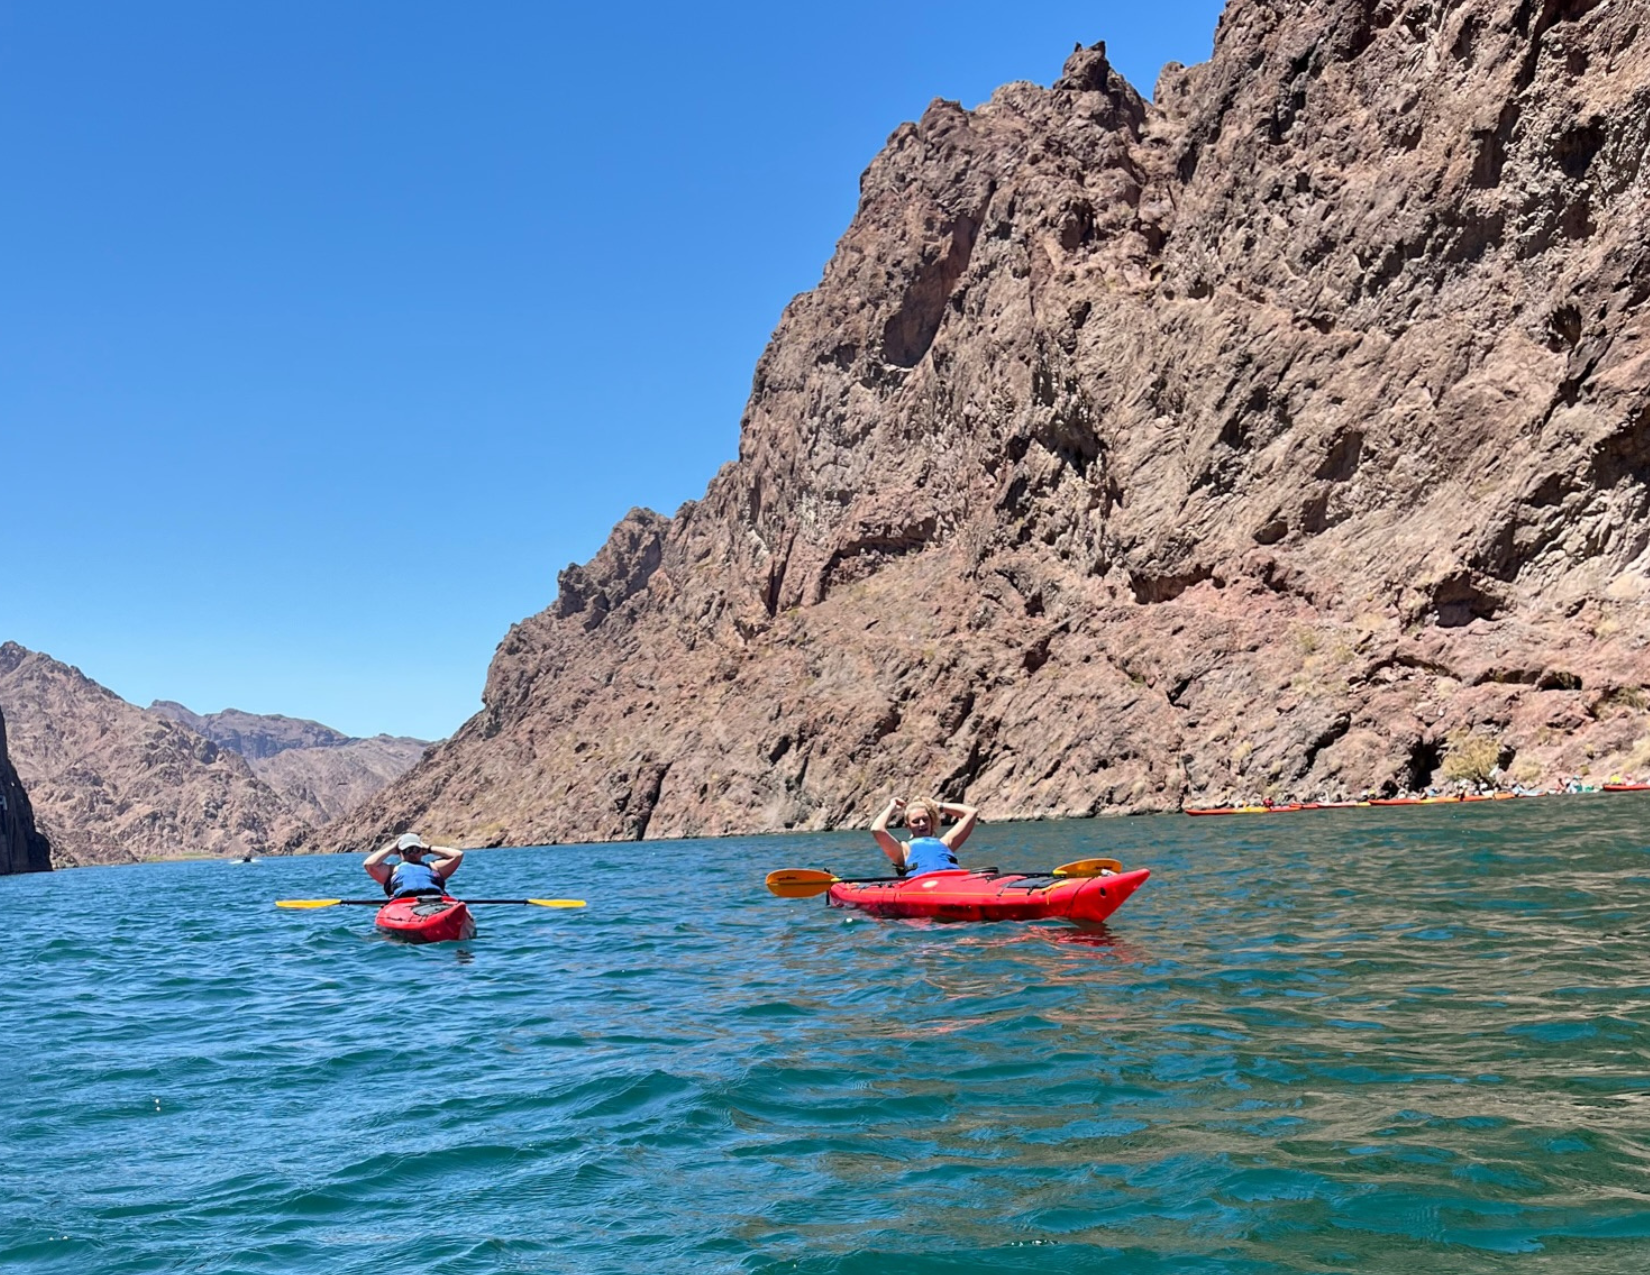 two kayakers enjoying the clear turquoise water at Emerald Cove on the Colorado River near Las Vegas, Nevada